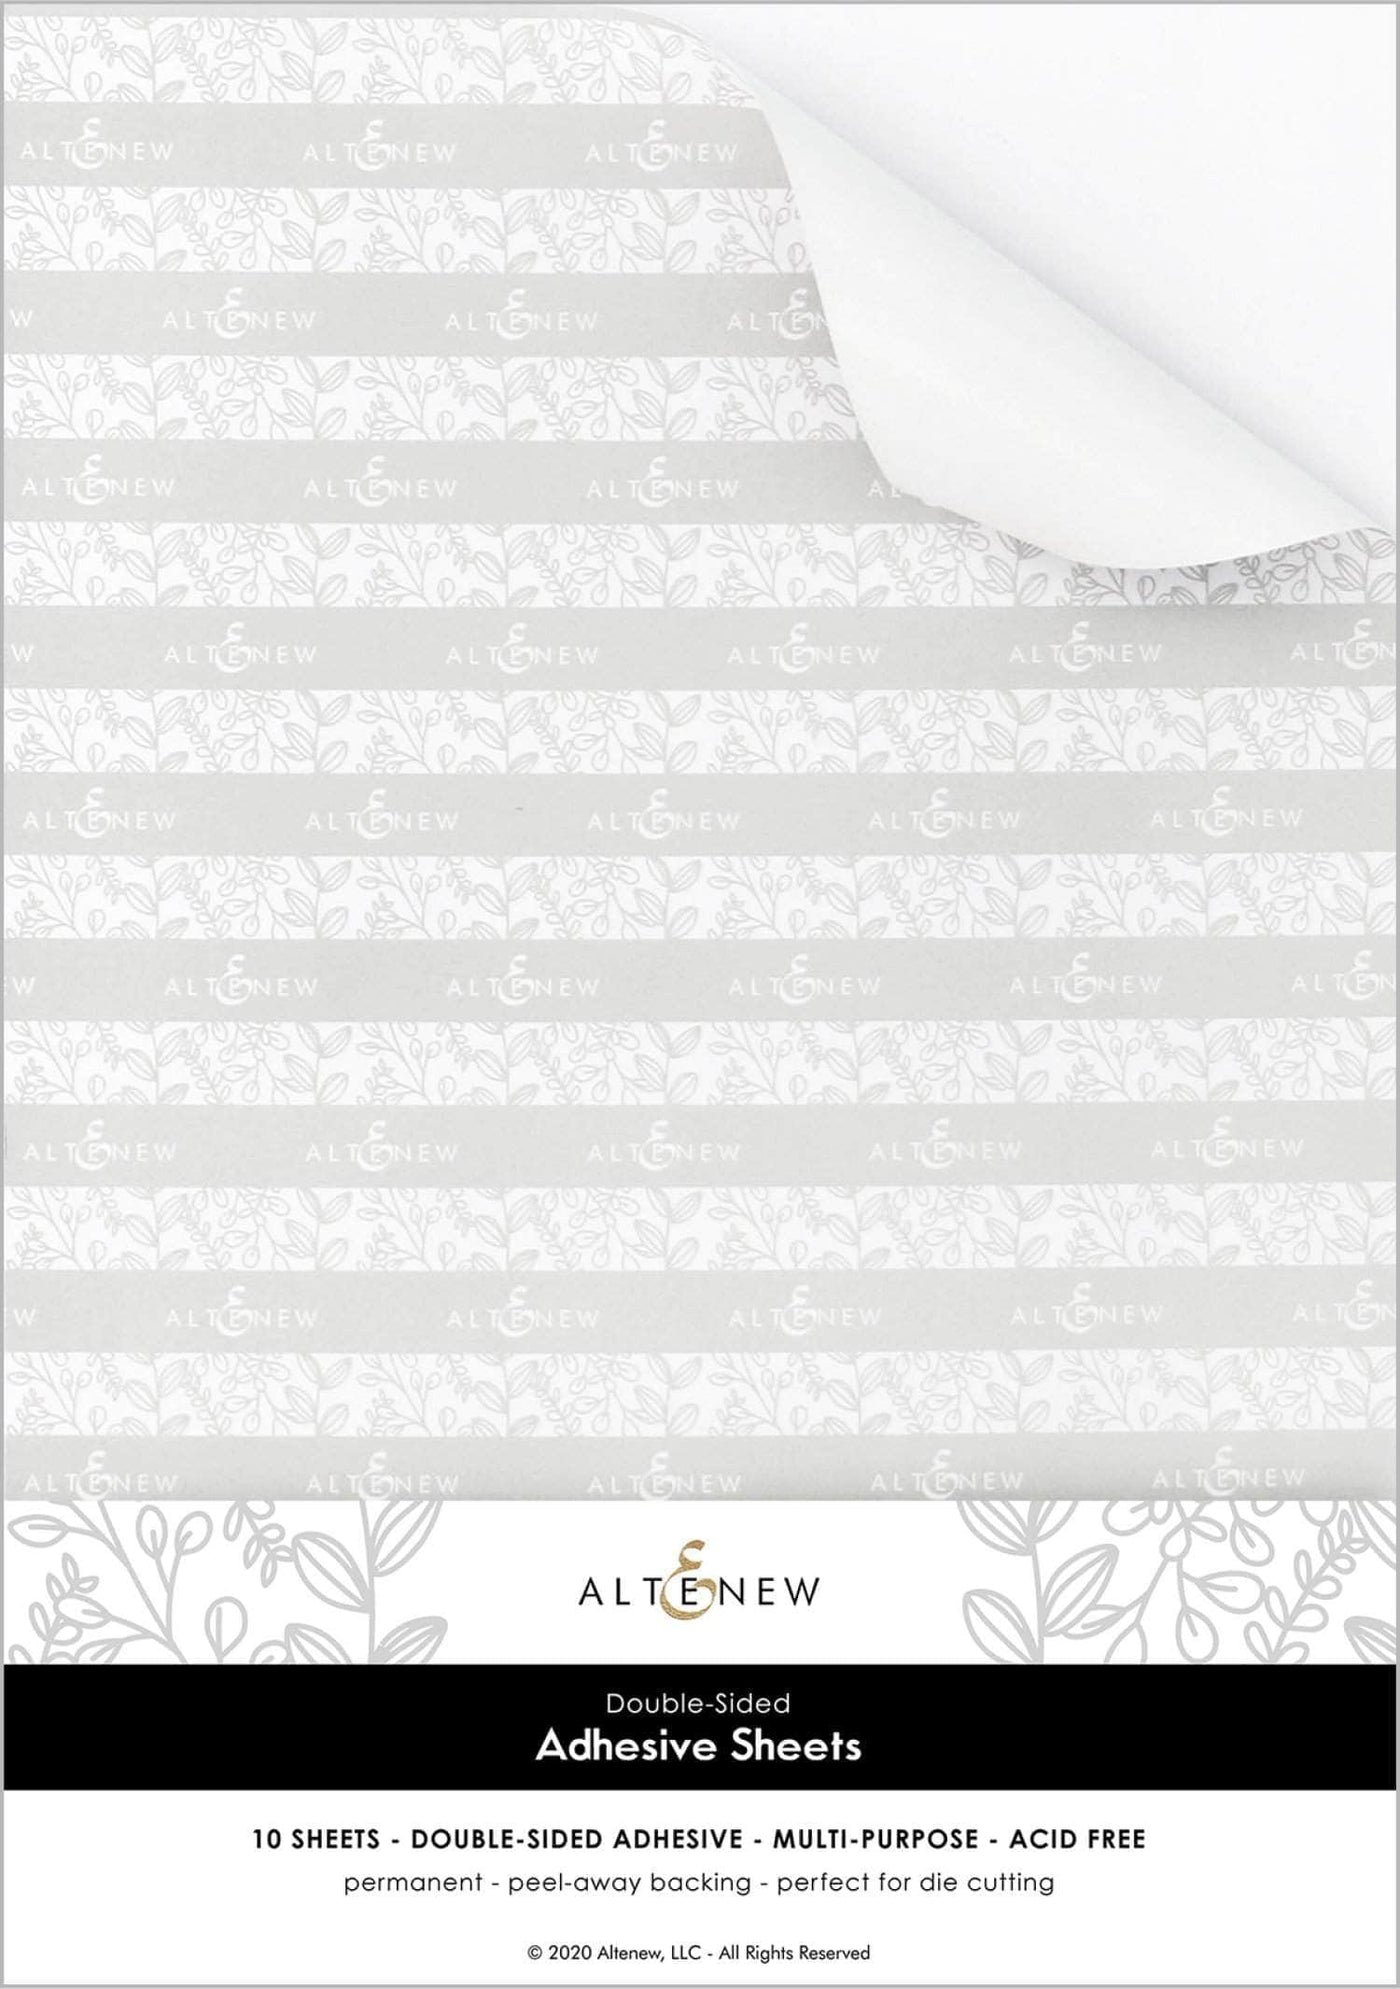 Altenew Tools Bundle Dreamy Masking Paper and Double-Sided Adhesive Sheets Bundle